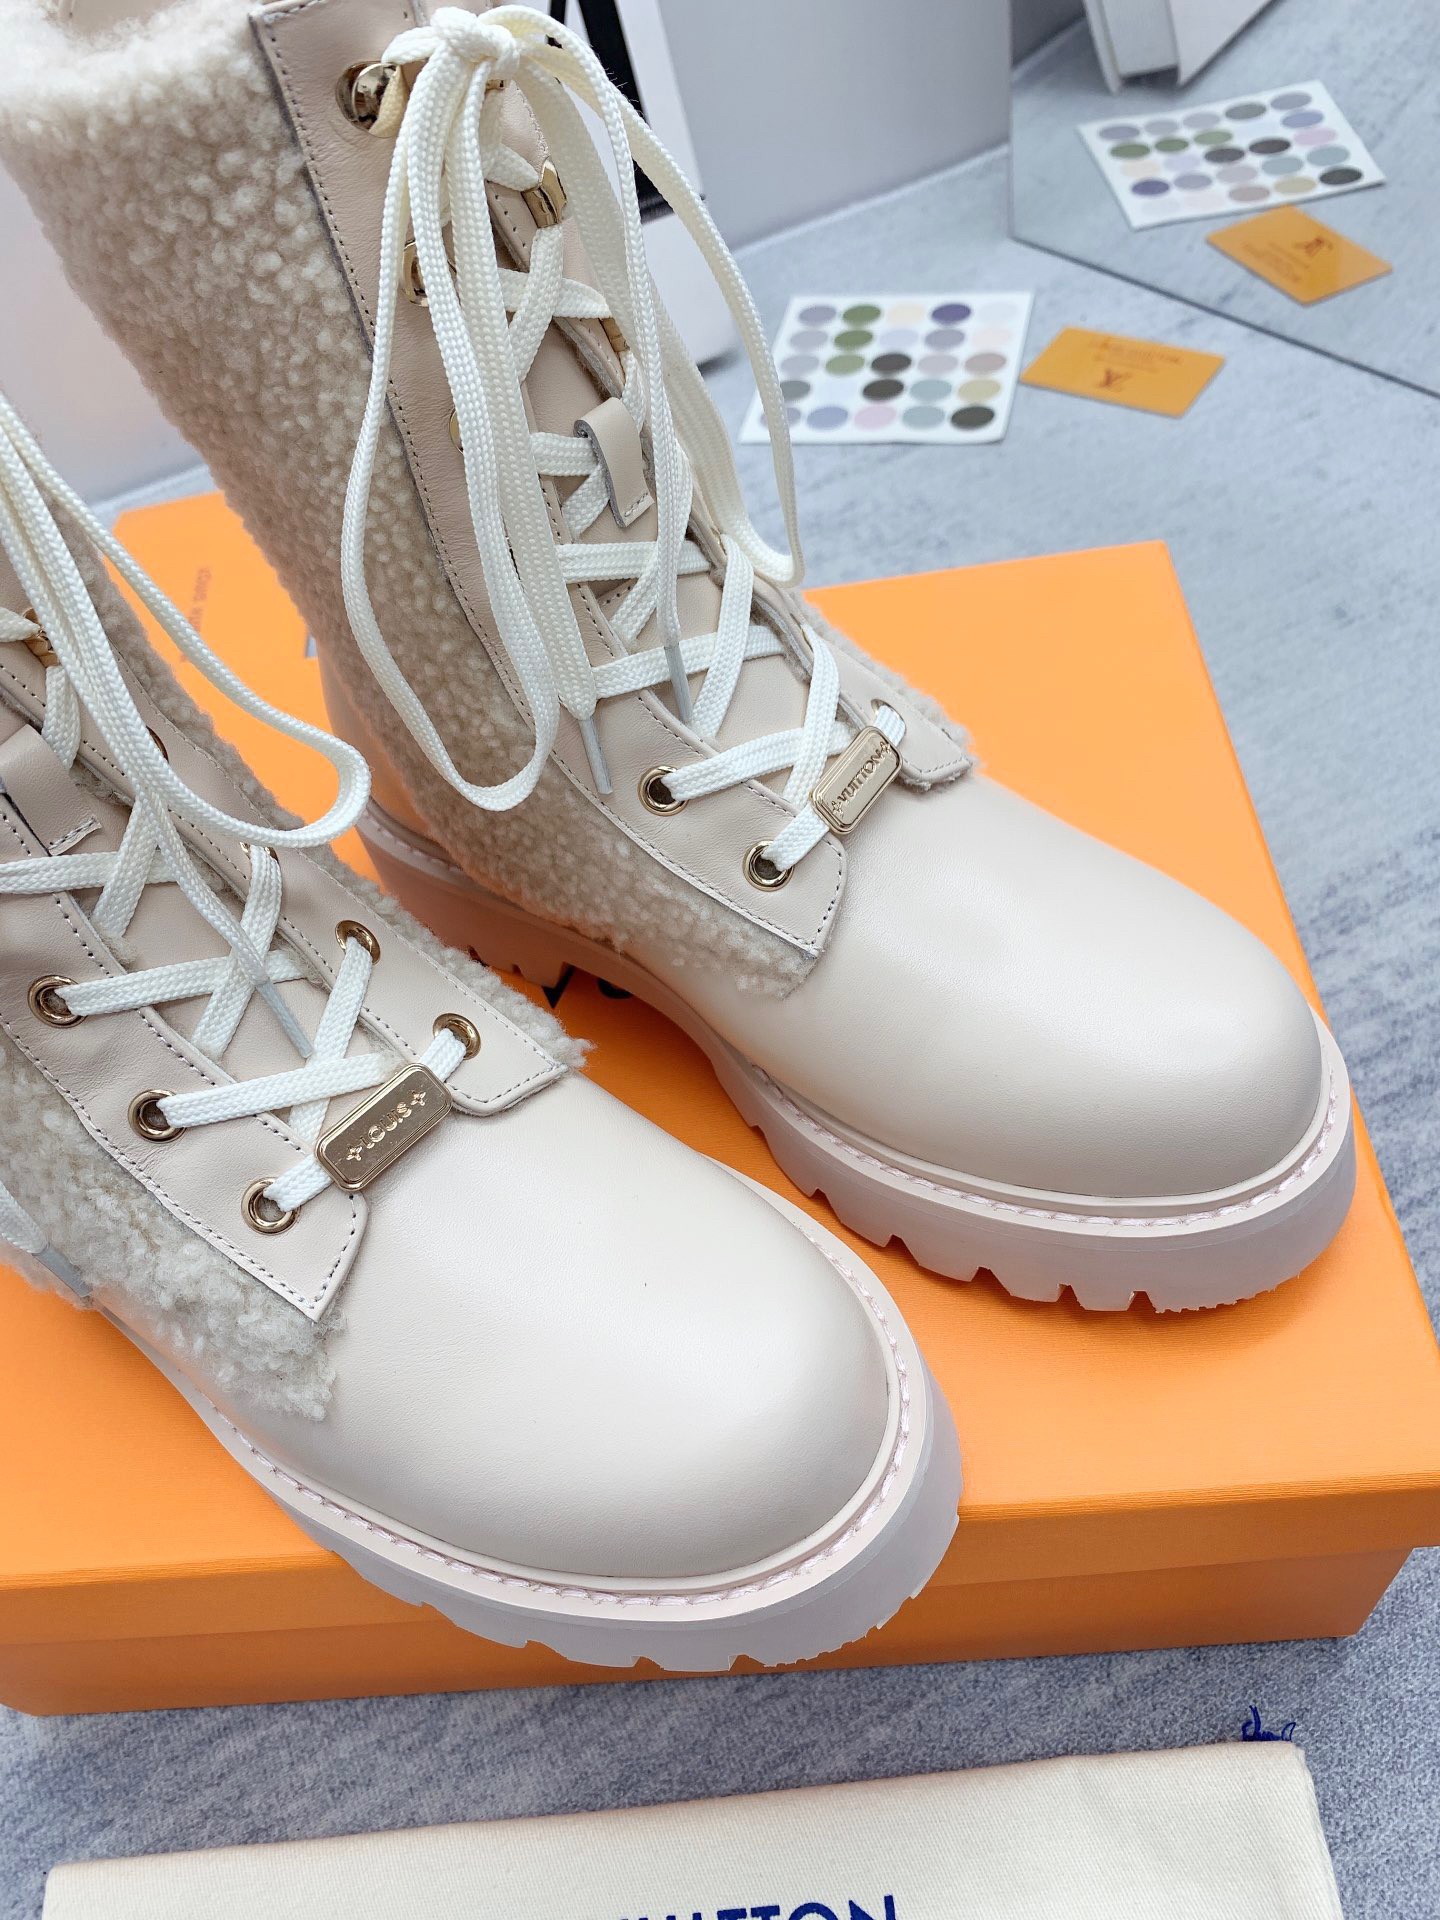 Replica Louis Vuitton Territory Flat Ranger Boots In Cream Leather